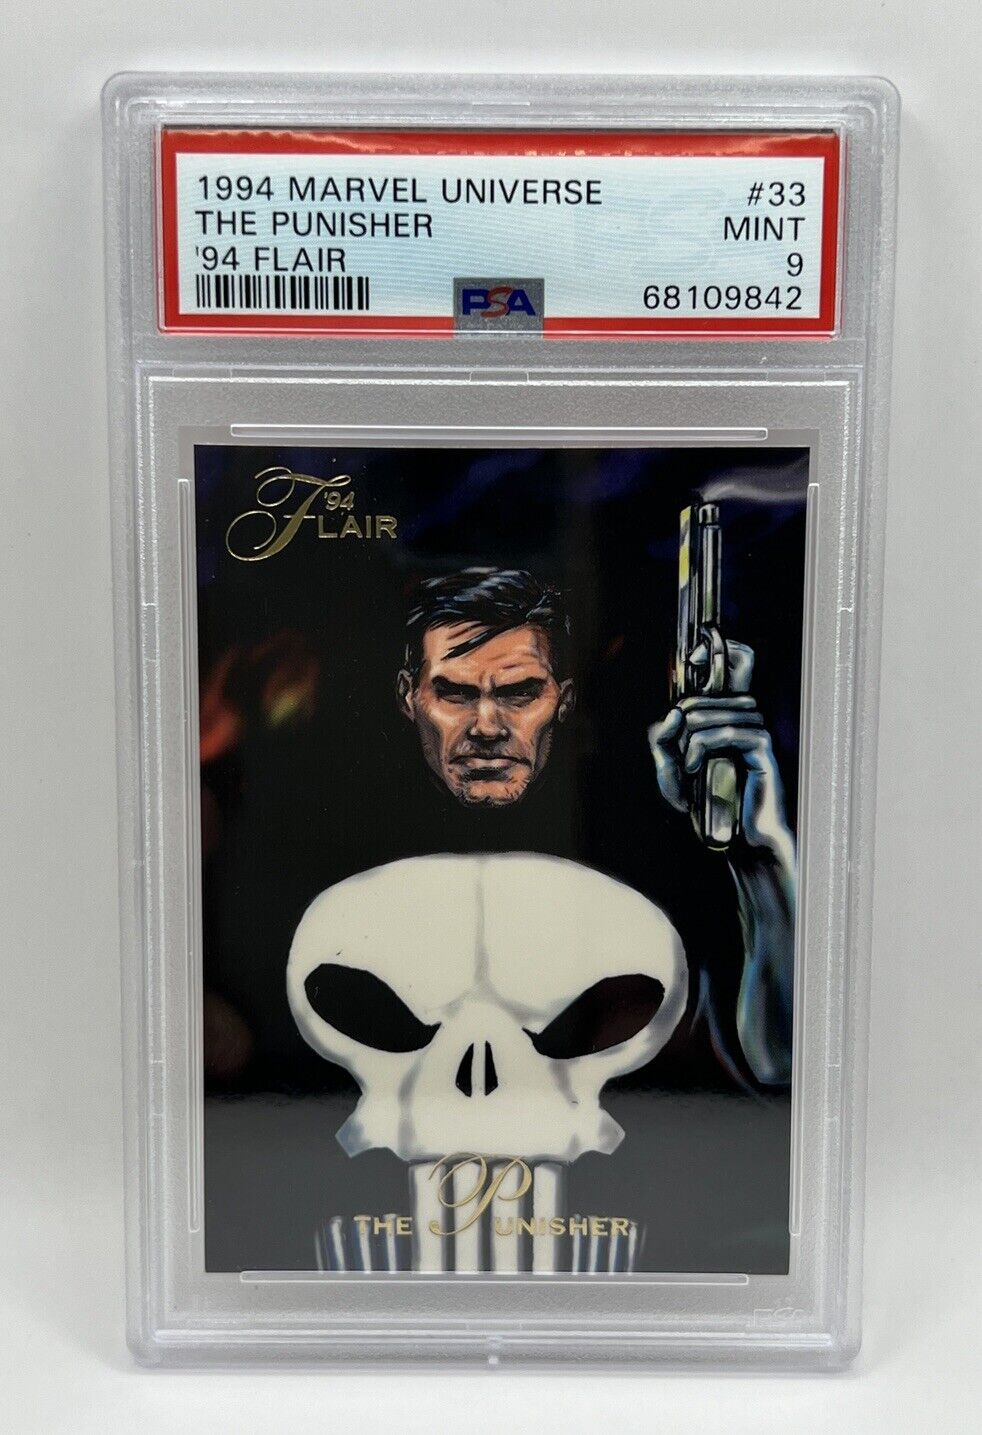 1994 MARVEL UNIVERSE #33 THE PUNISHER, '94 FLAIR  PSA 9 MINT